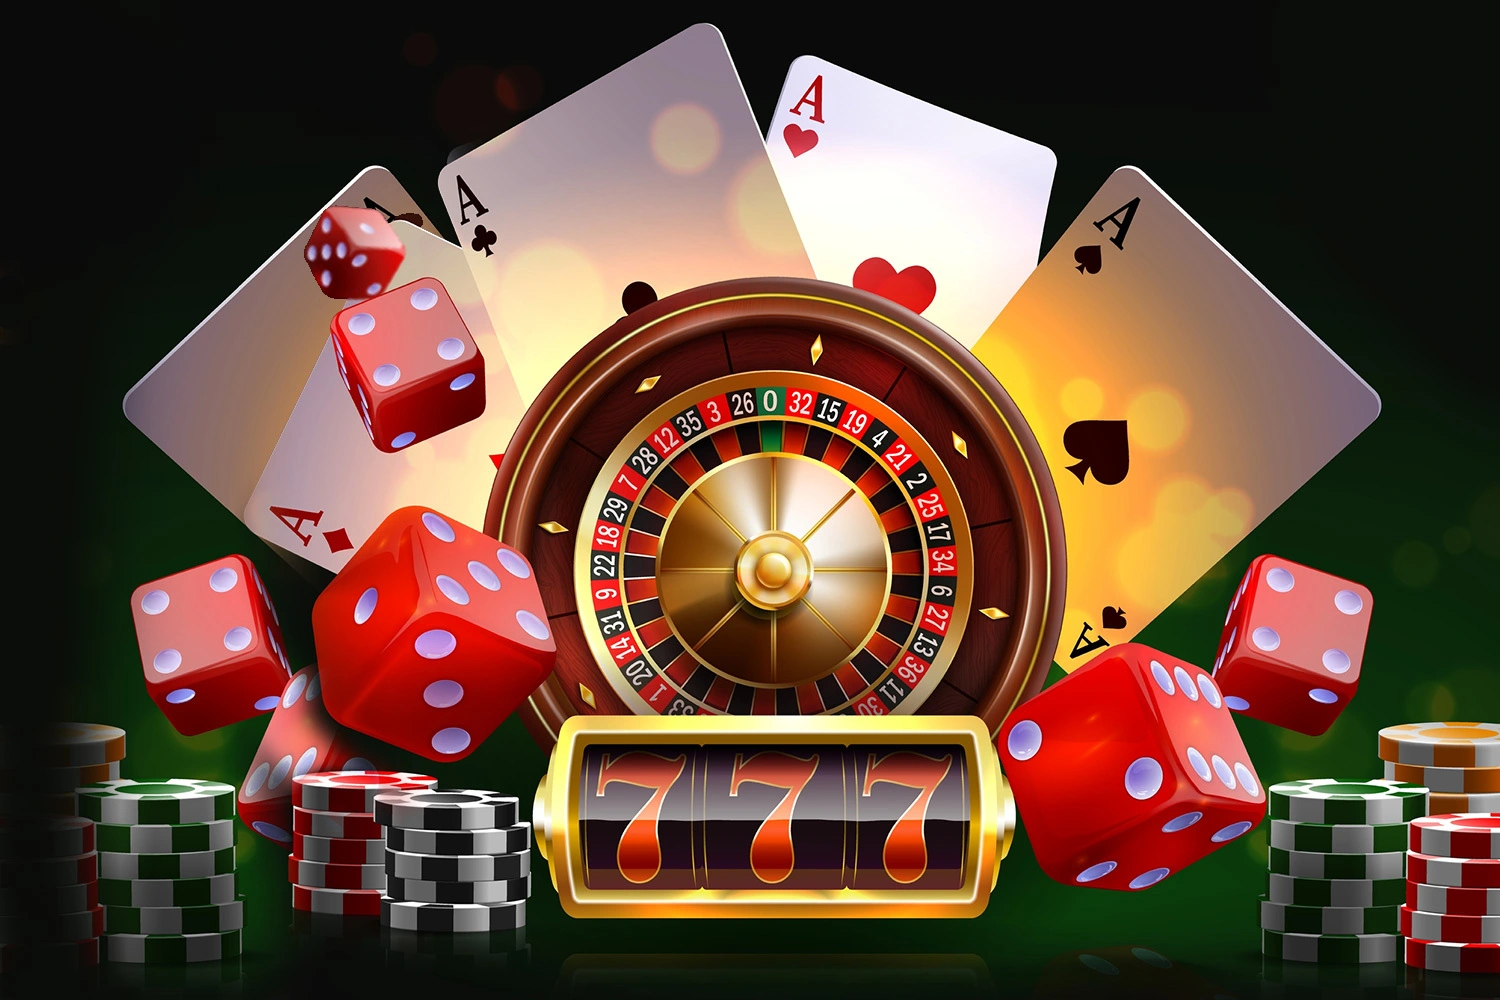 real money casino online and Leisure: Finding Balance